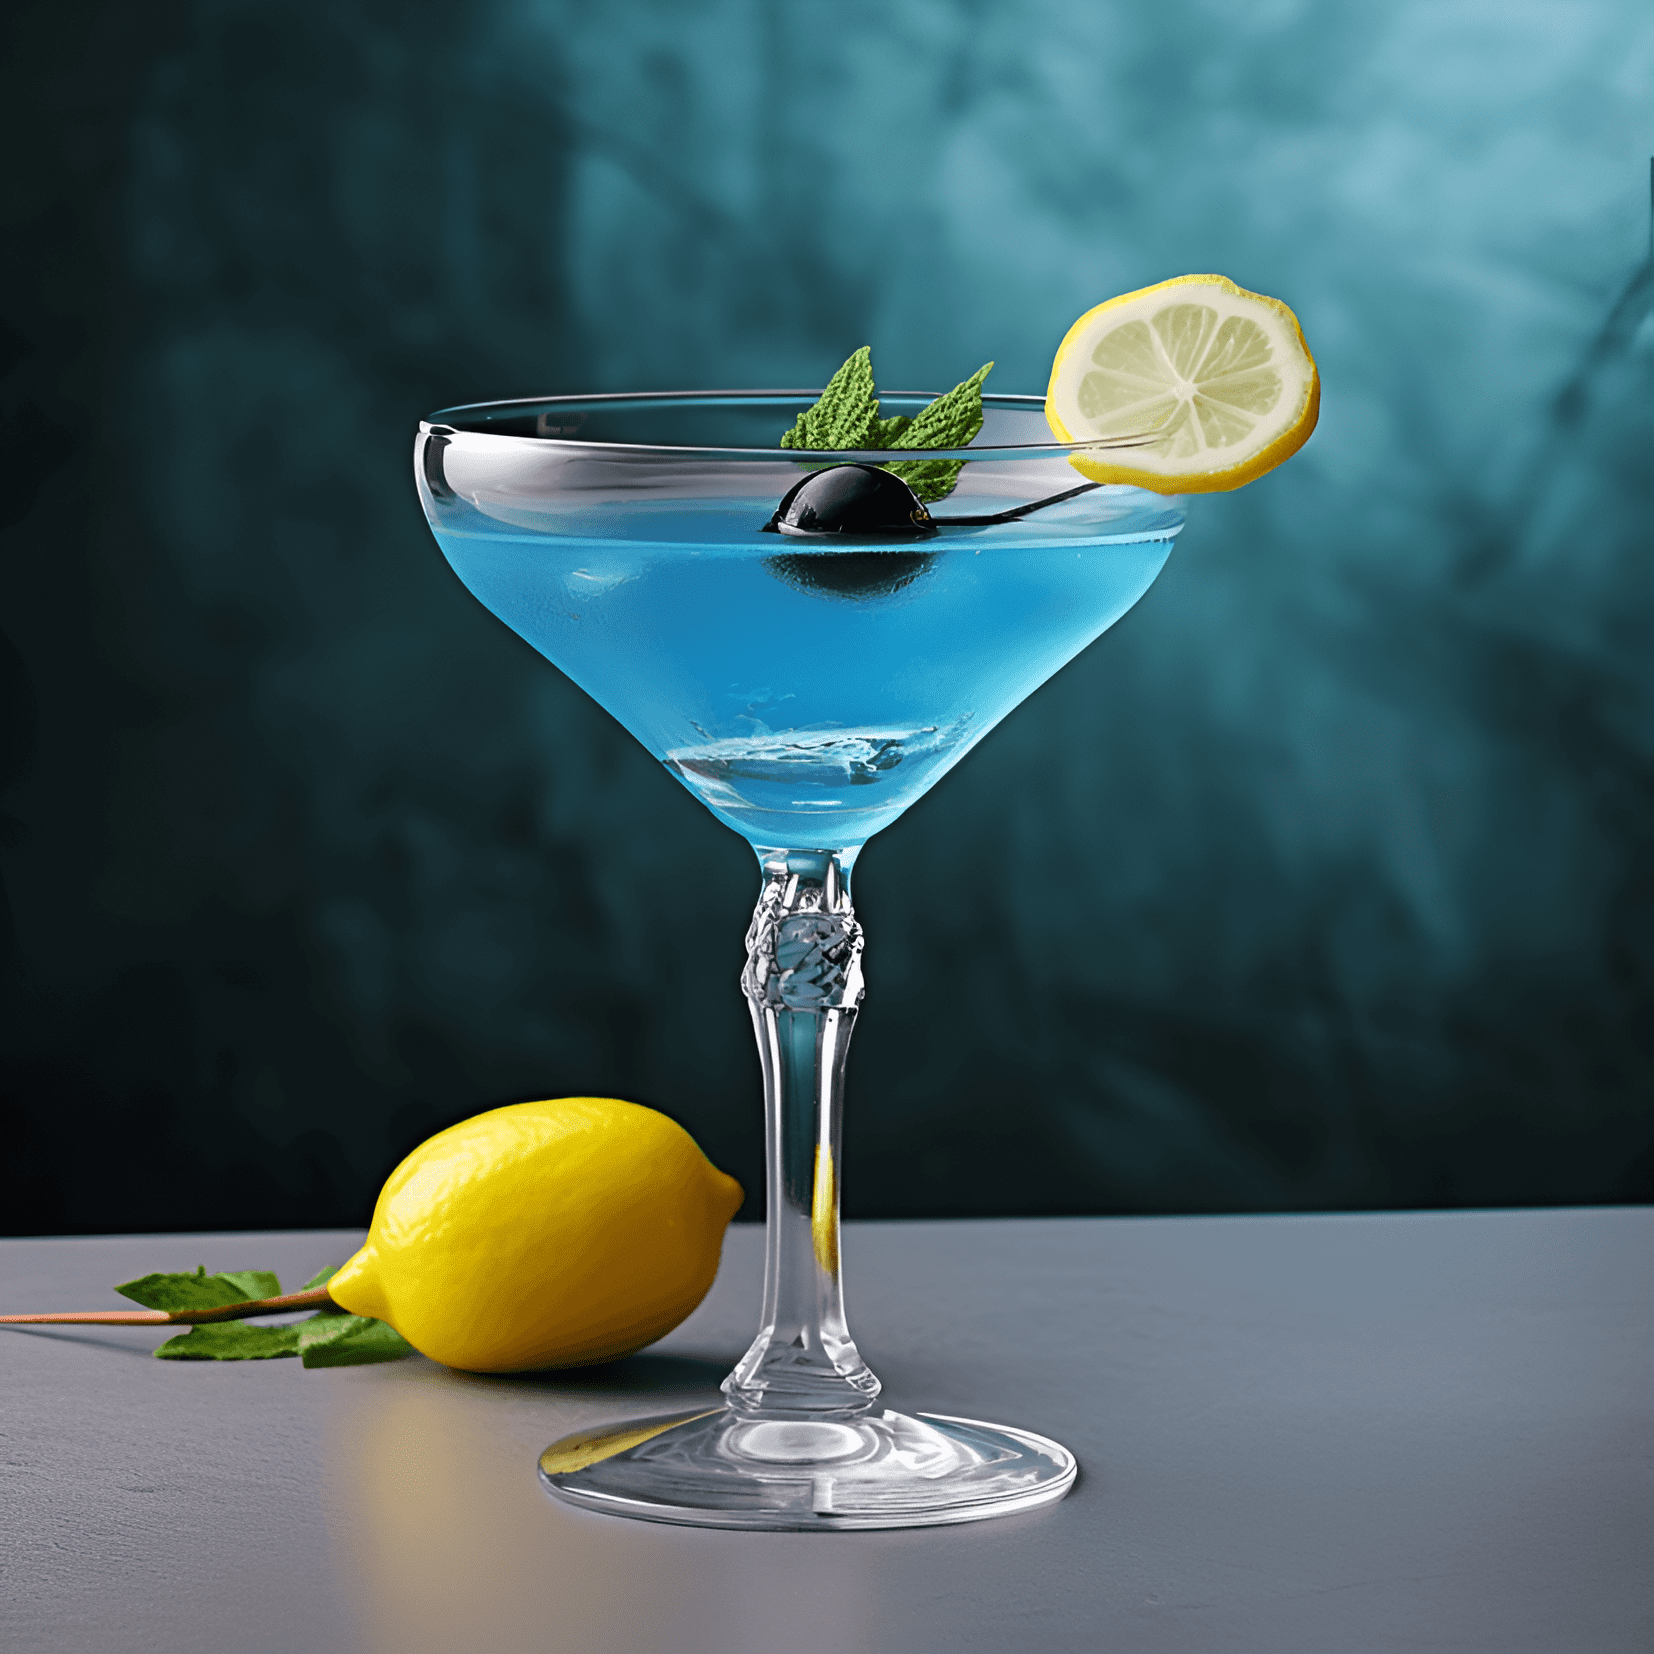 Bluebird Cocktail Recipe - The Bluebird cocktail has a delightful balance of sweet and sour flavors, with a hint of bitterness from the gin. The drink is smooth, refreshing, and slightly fruity, making it an enjoyable choice for those who appreciate a well-rounded cocktail.